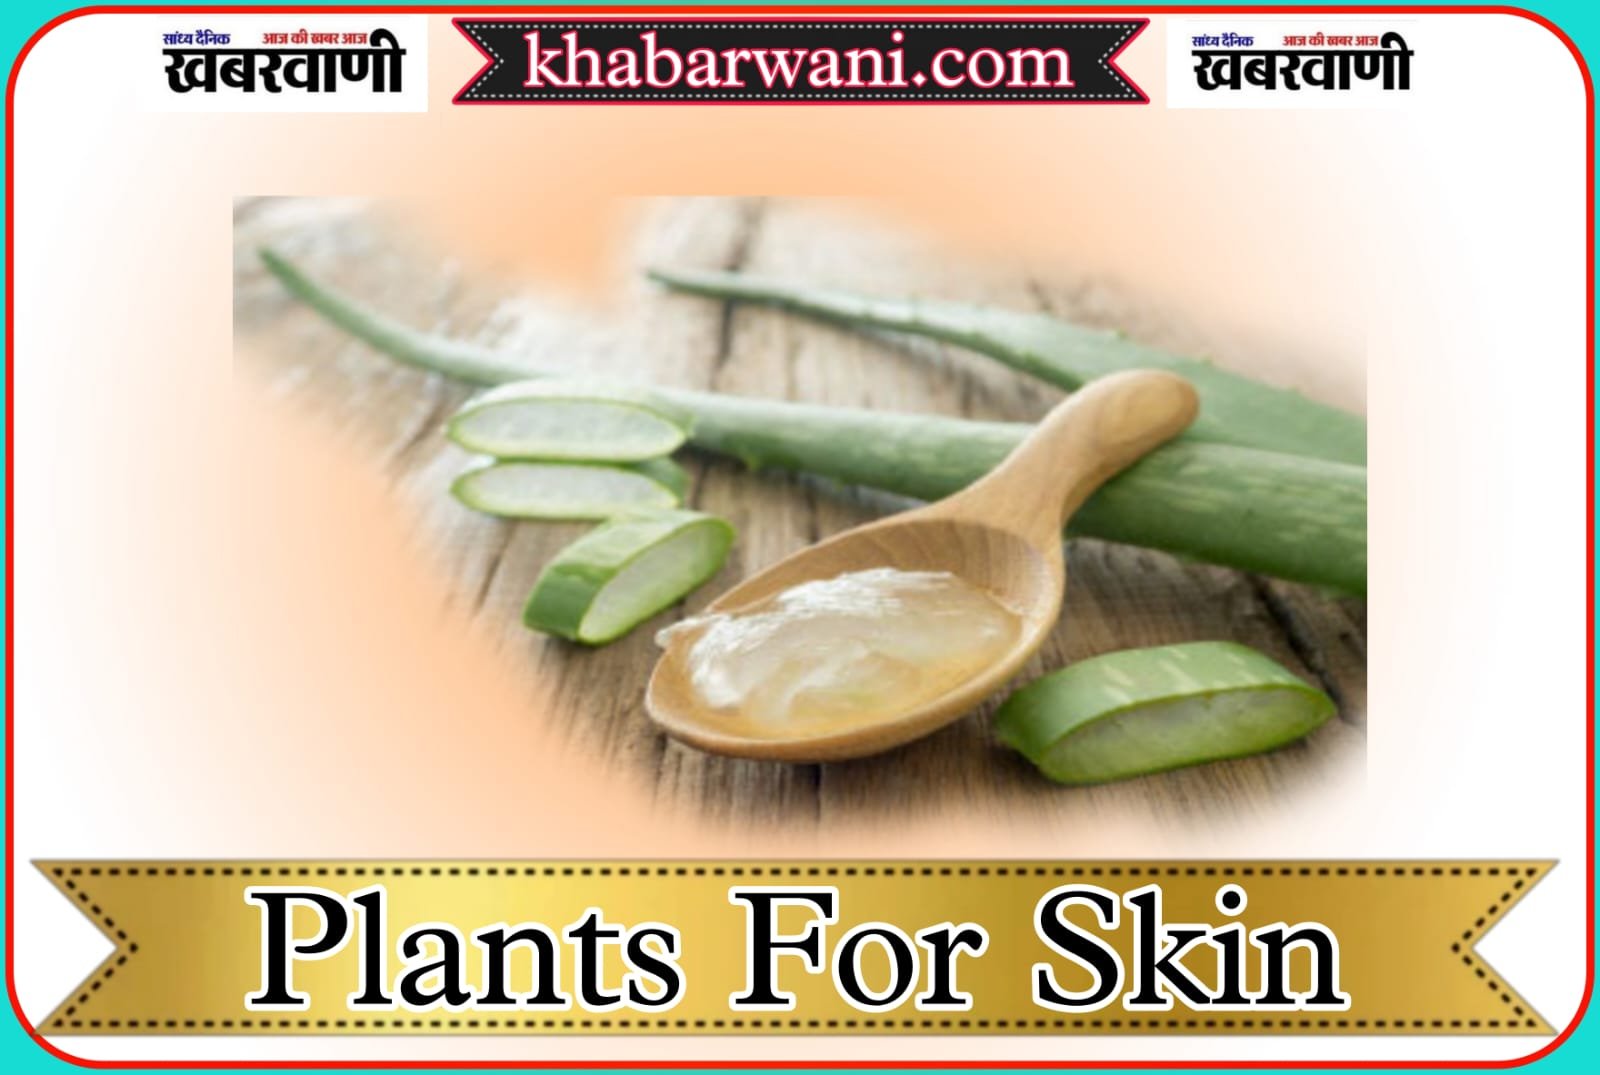 Plants For Skin - Use these plants at home on the skin.